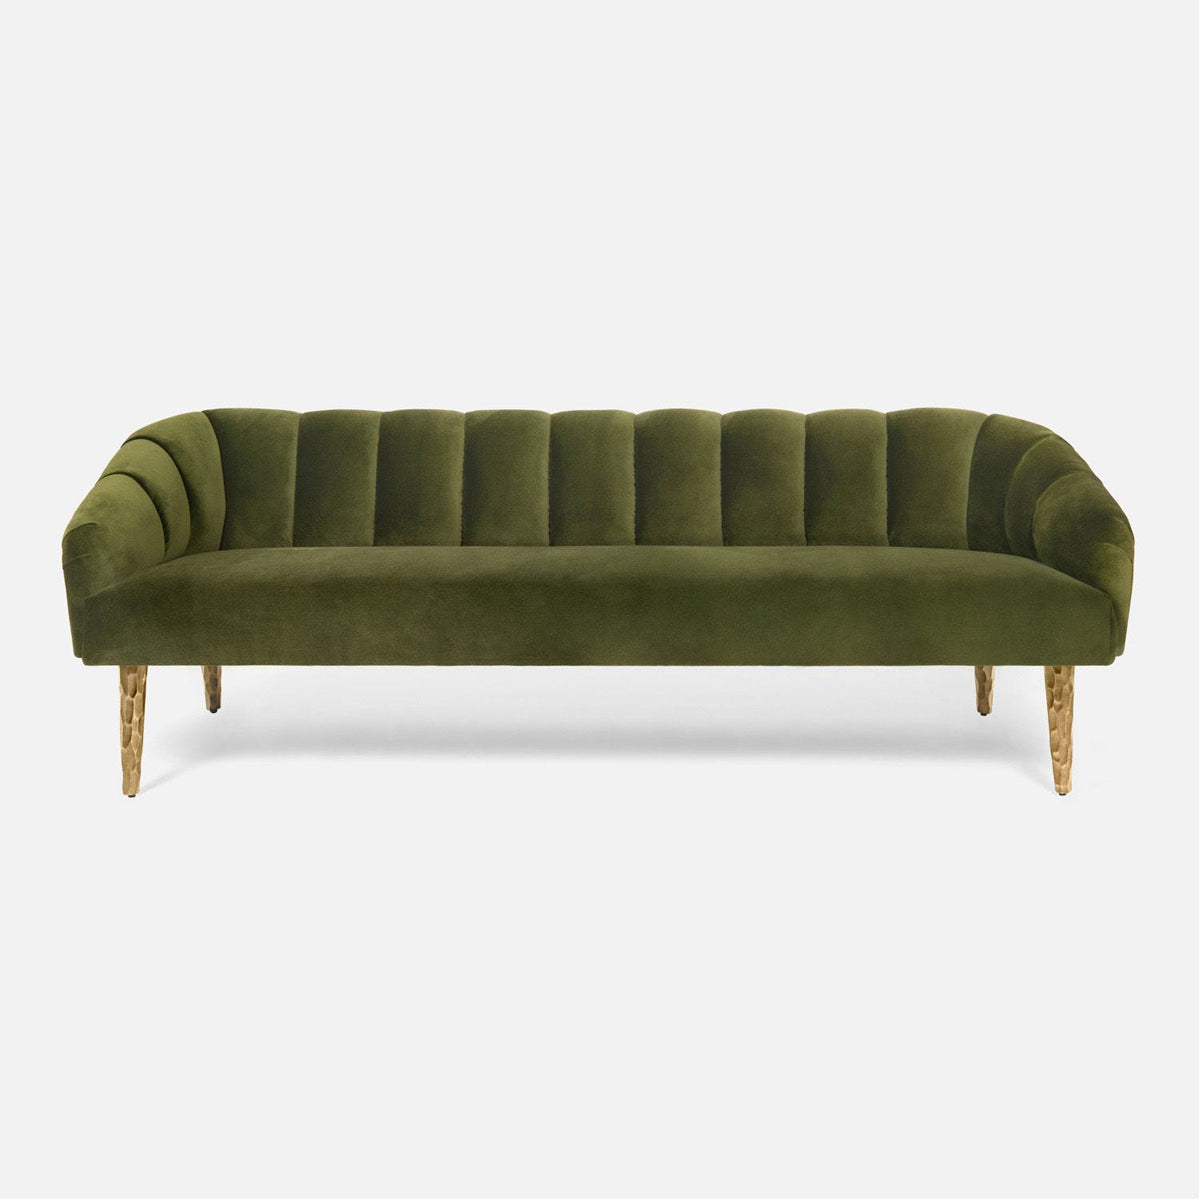 Made Goods Rooney Upholstered Shell Sofa in Bassac Shagreen Leather